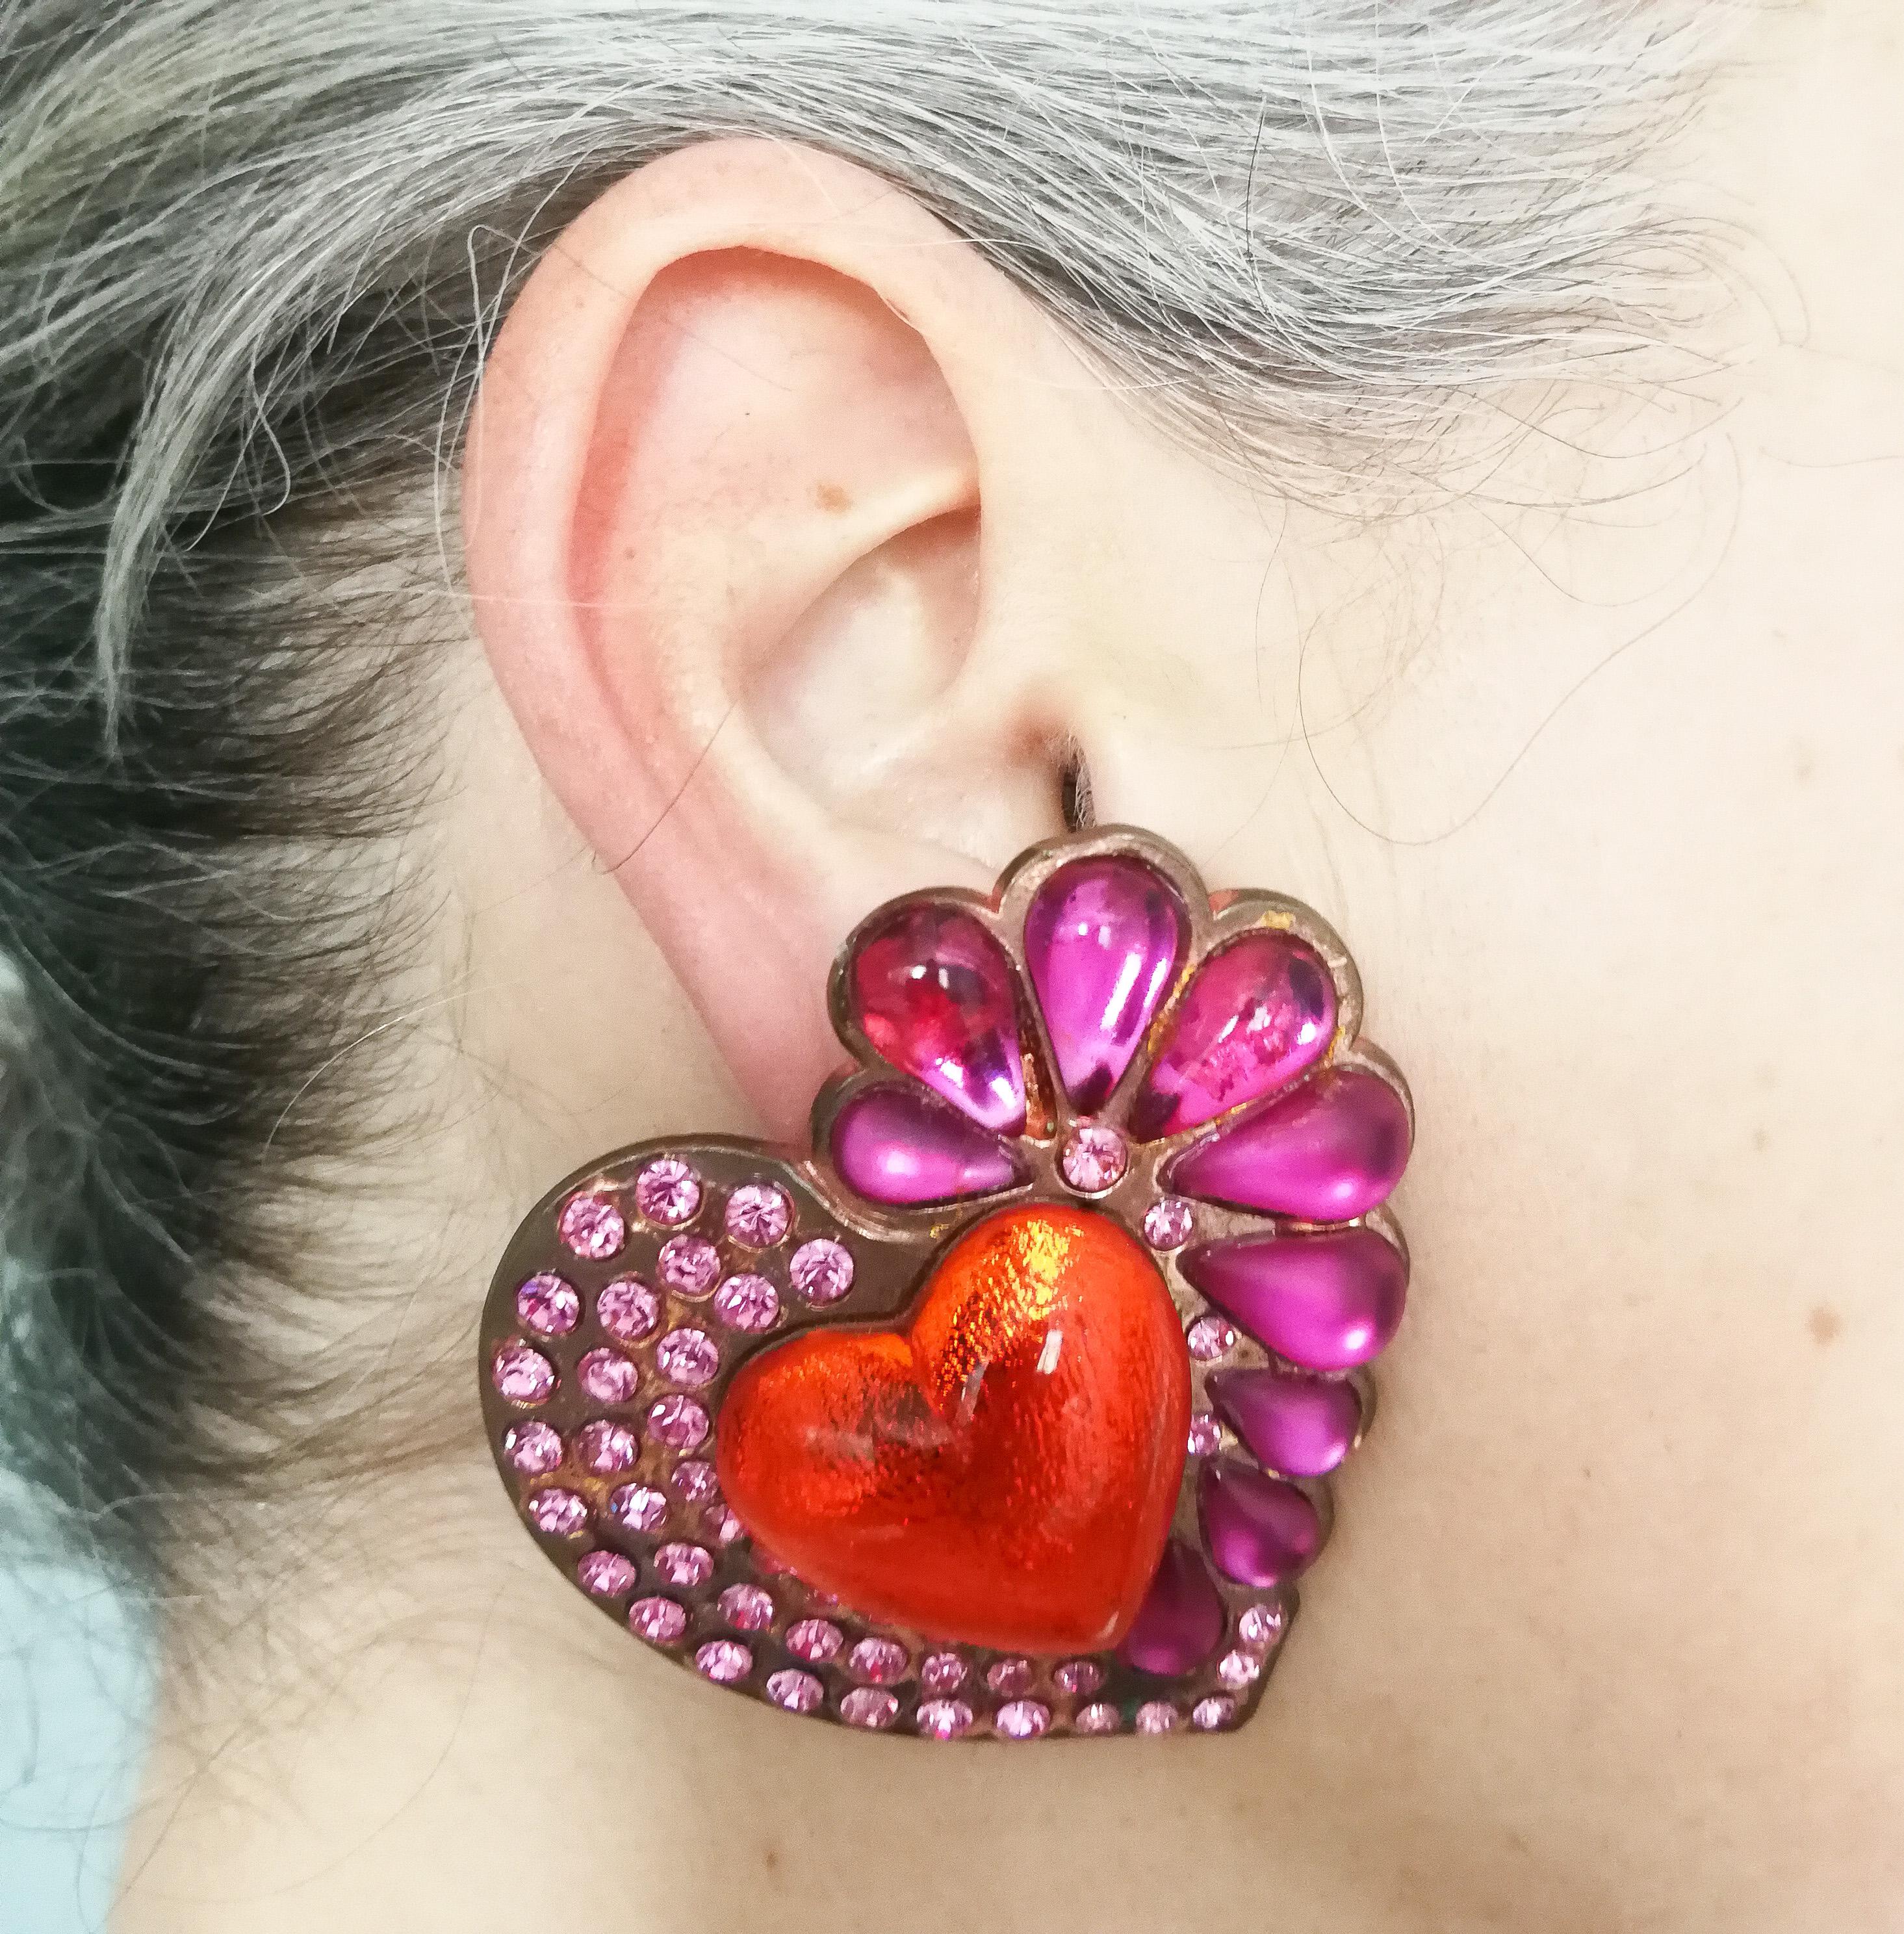 Truly magnificent, fabulous and over sized 'heart' earrings, in vibrant and dynamic shades of shocking pink and orange. Frosted, clear and foiled stones, of varying shapes and size, unique to these earrings, create a sumptuous combination. Truly